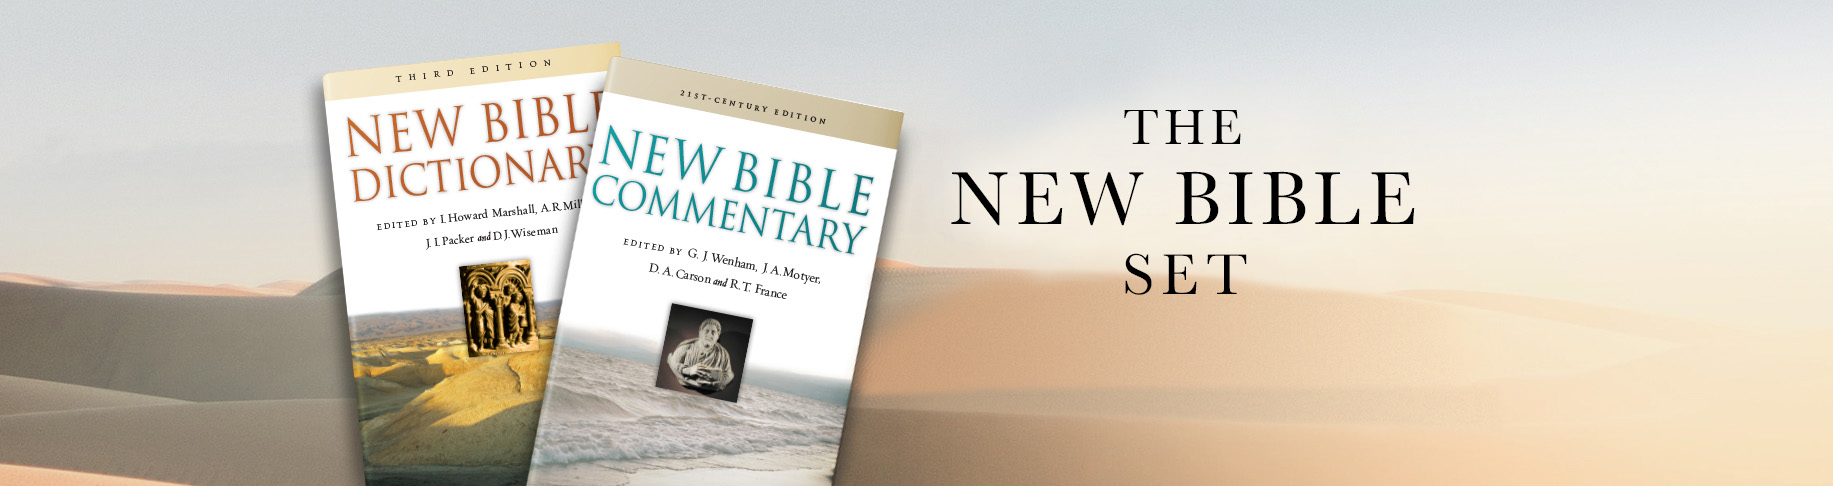 The New Bible Set - Save 20% on the two-volume reference resource